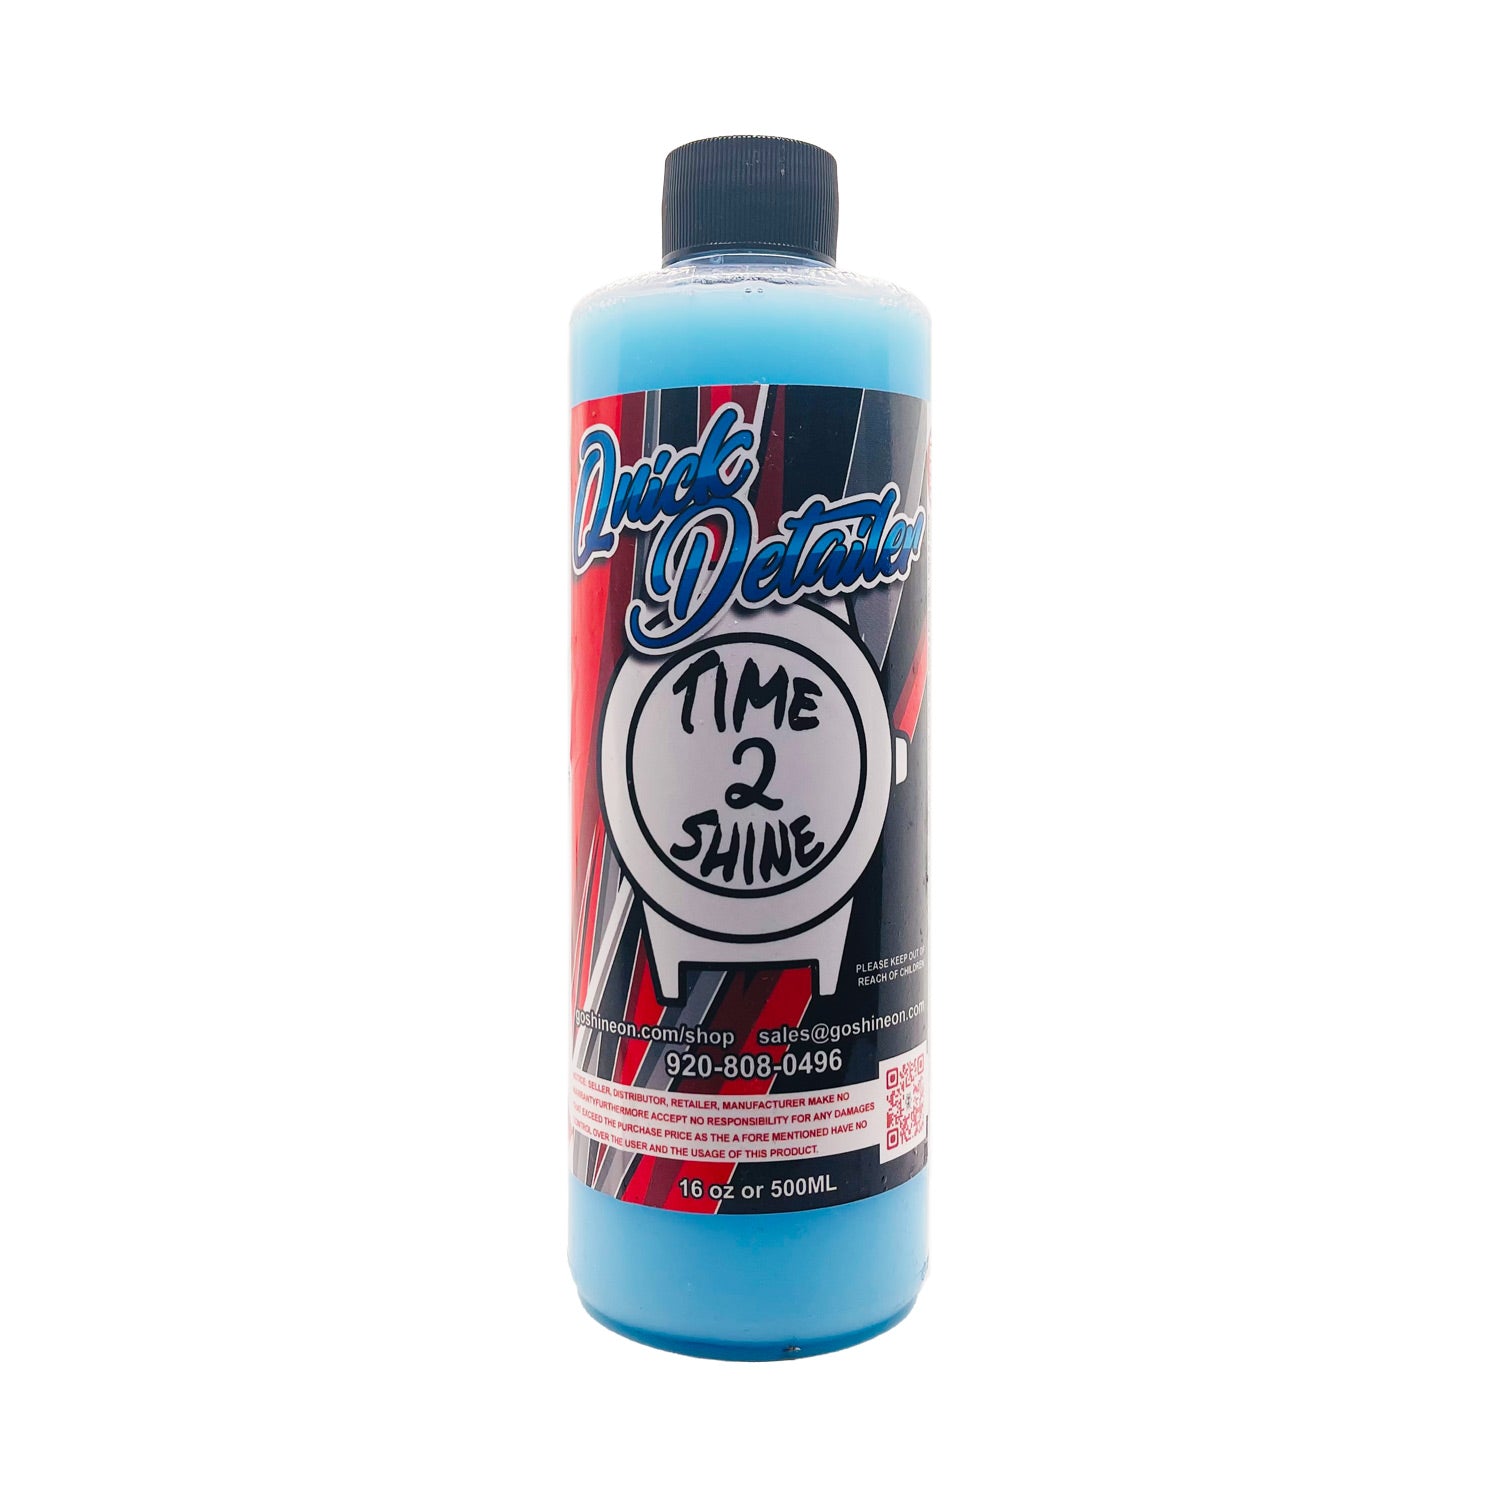 The Key Differences Between Quick Detailer and Spray Wax